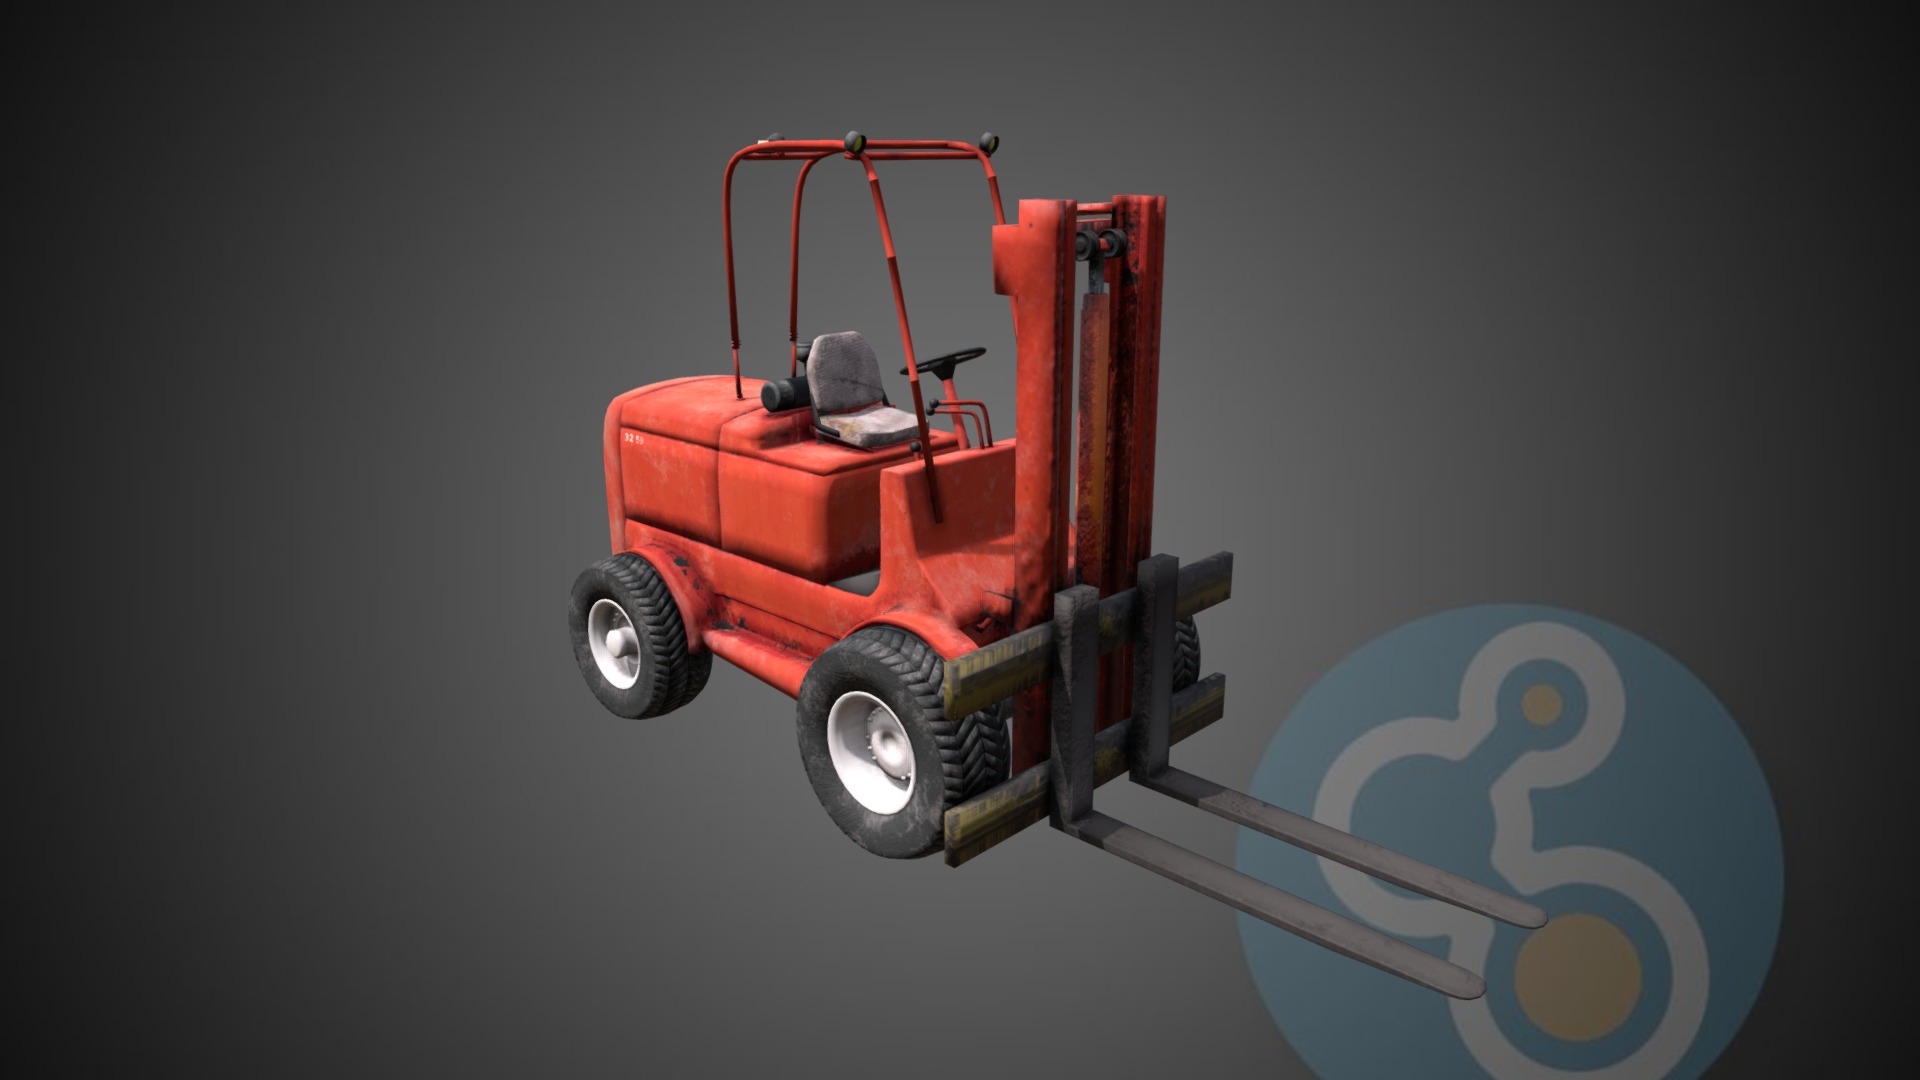 3D model Forklift - This is a 3D model of the Forklift. The 3D model is about a red and white tractor.